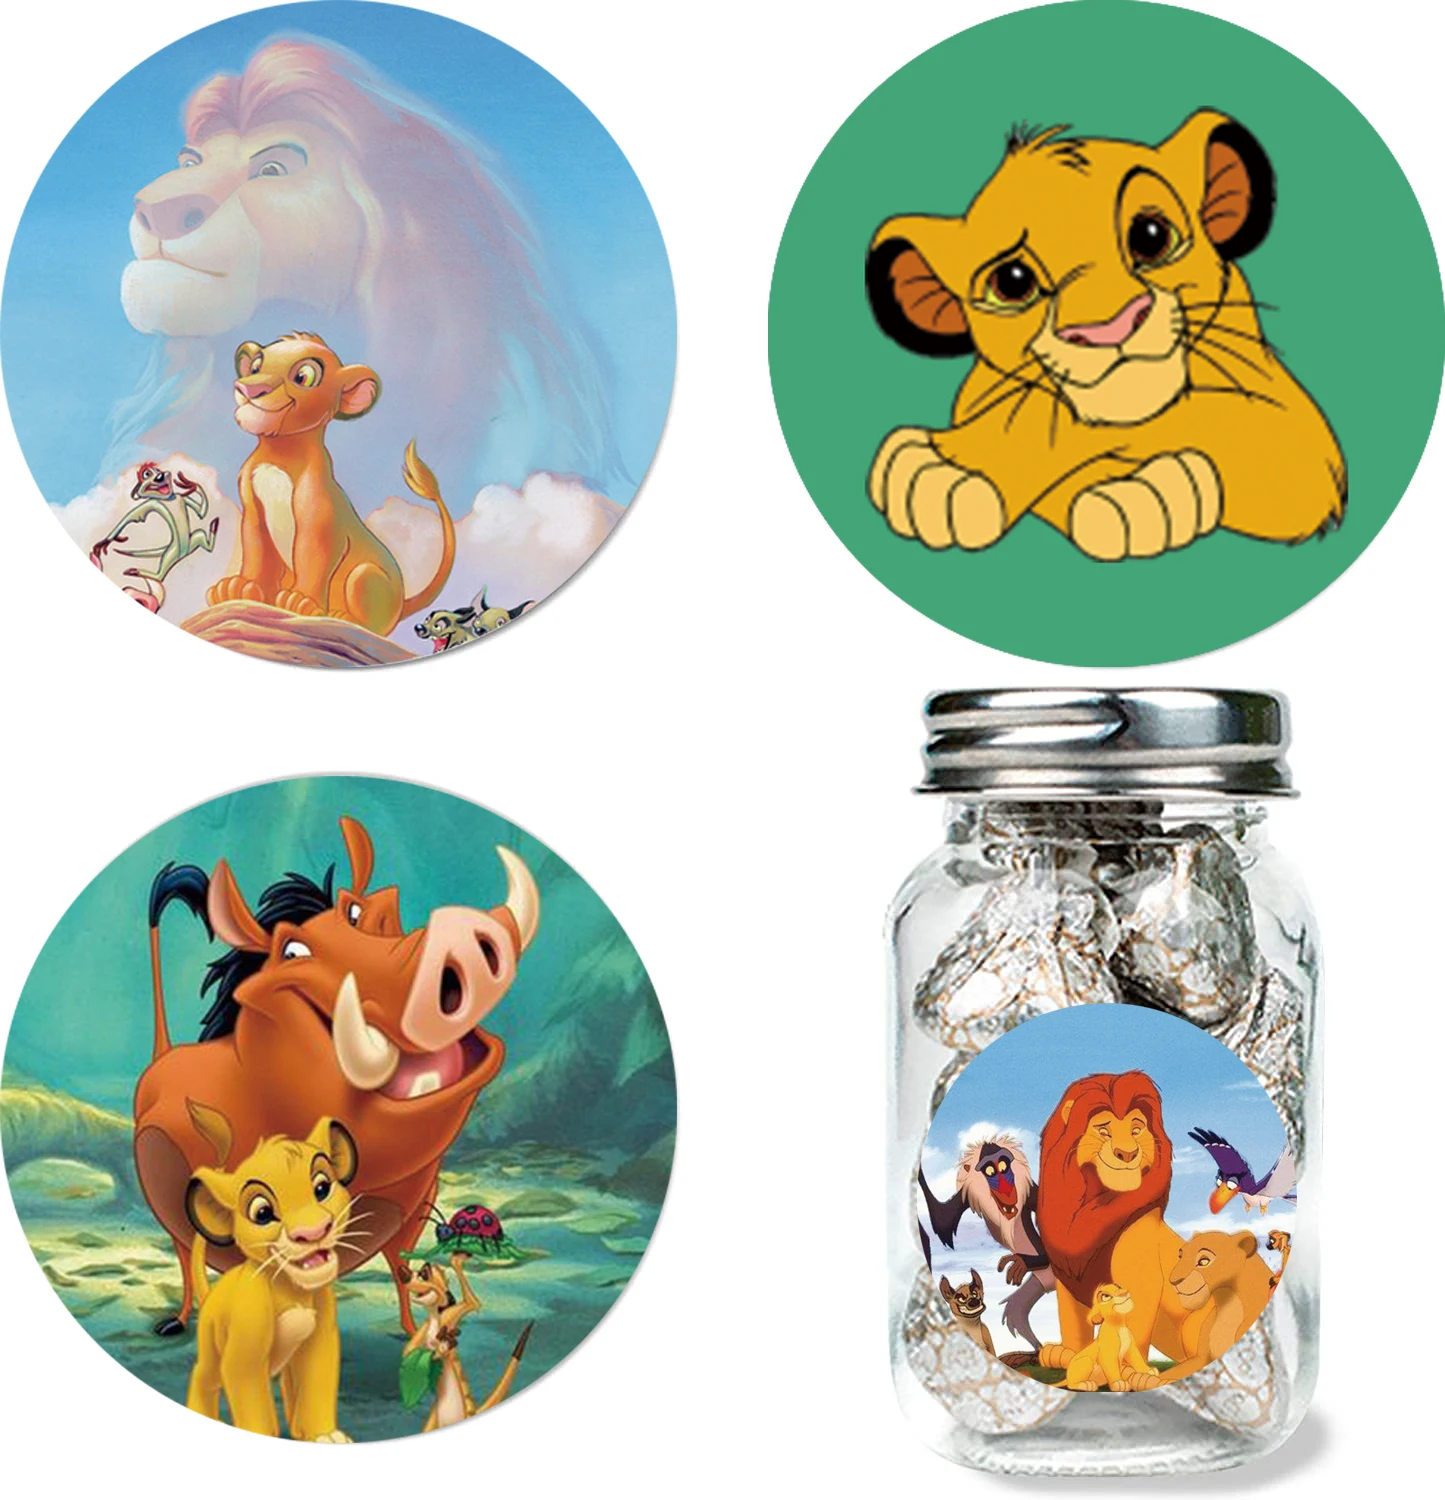 Omilut Simba Label Stickers The Lion King Simba Round DIY Sticker For Gift Bag Safari Jungle Birthday Party Decor Supplies